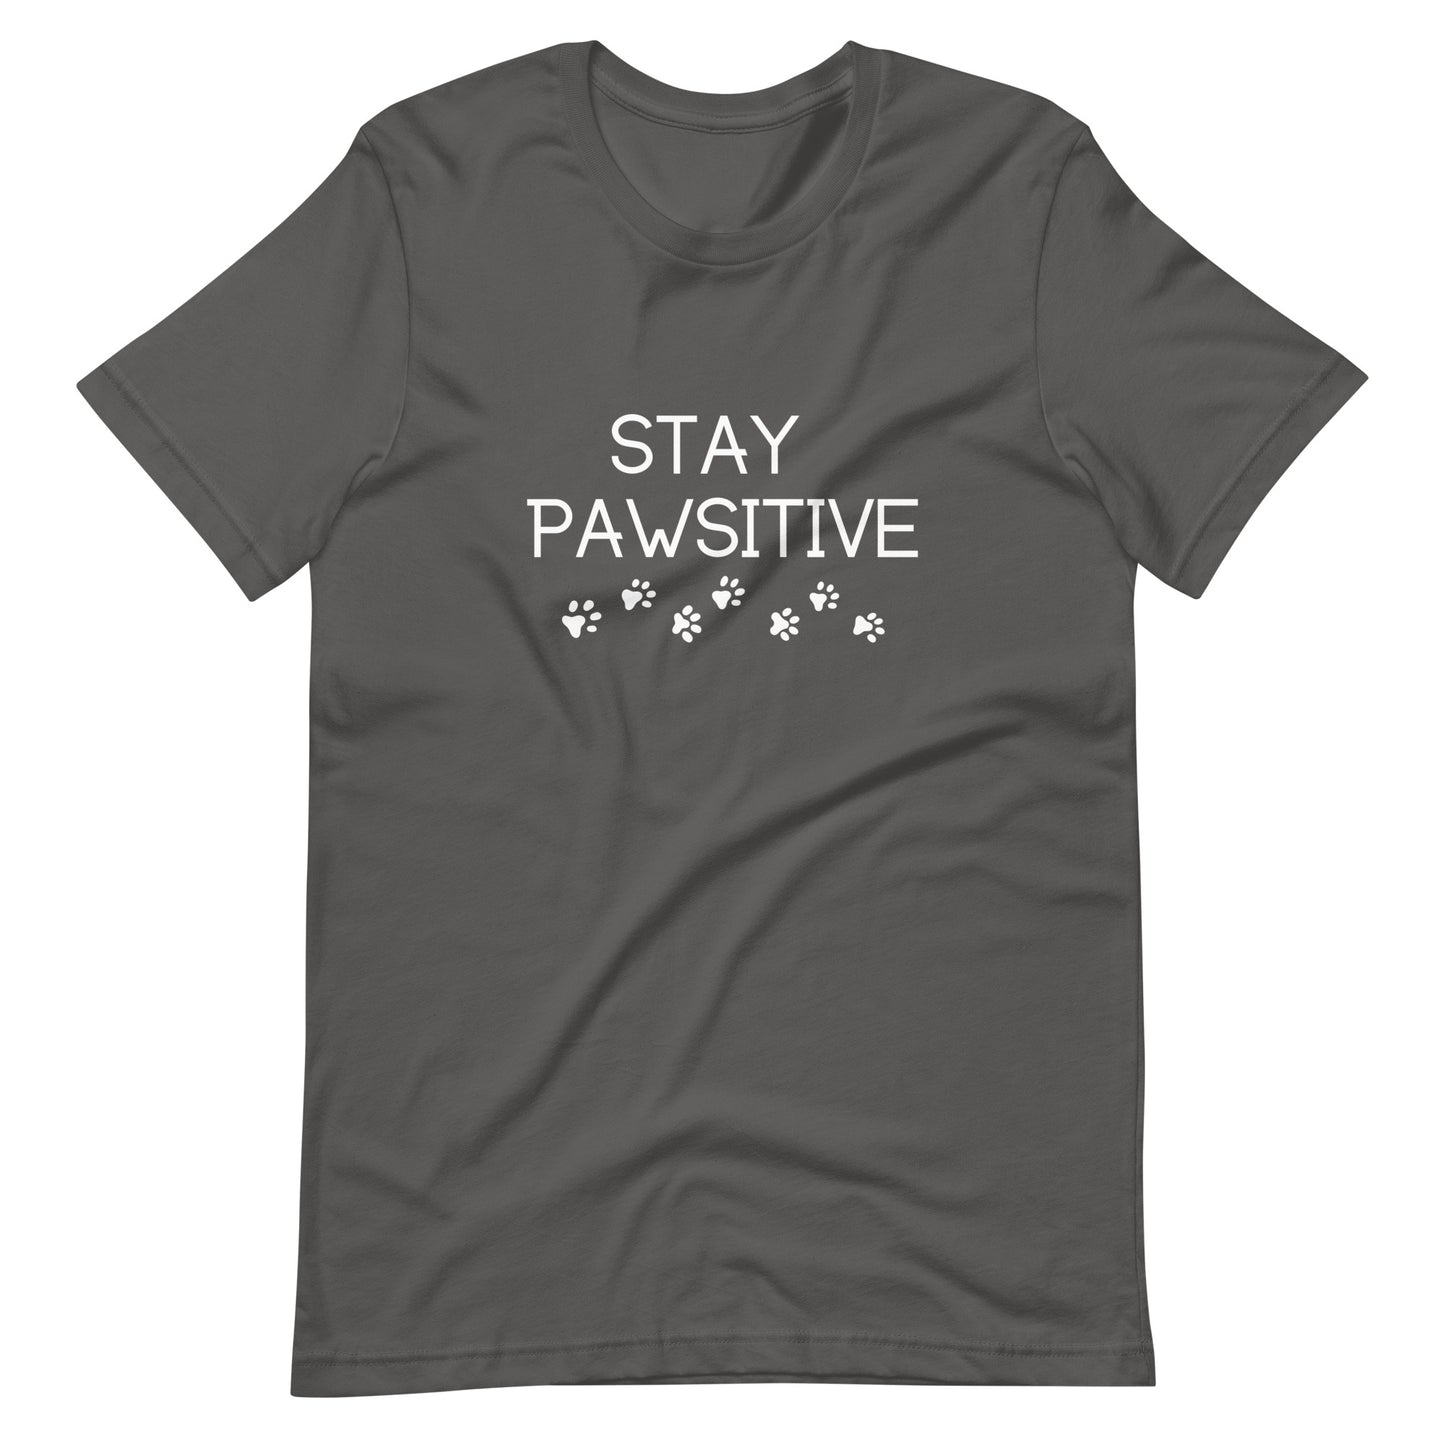 Stay Pawsitive Unisex T-Shirt